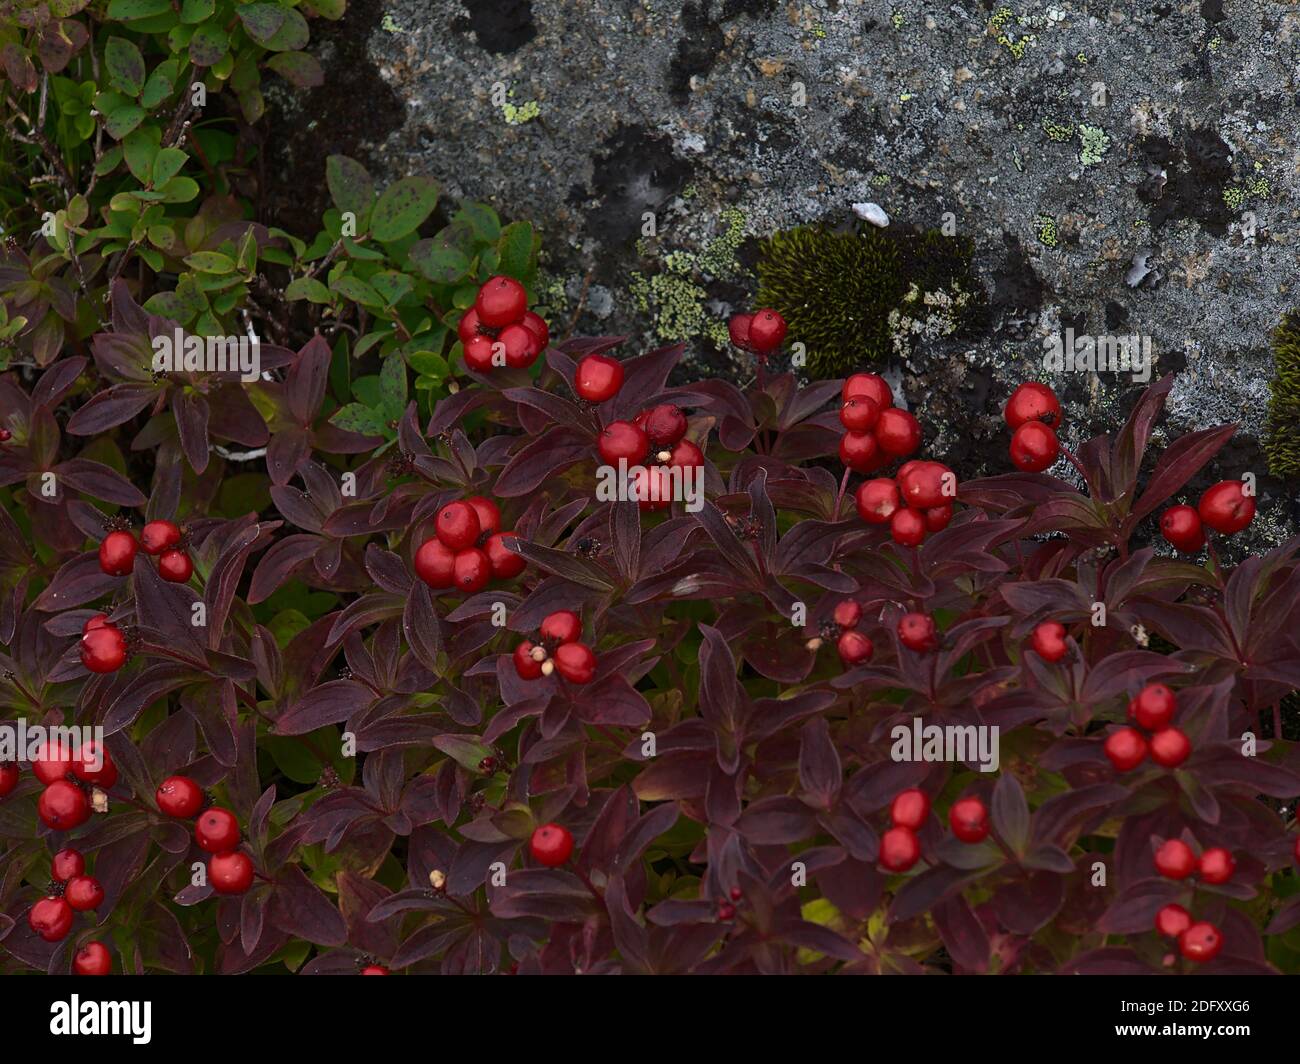 Closeup view of cornus suecica (dwarf cornel, bunchberry) bush with ripe red colored berries and purple discolored leaves between rocks in late summer. Stock Photo